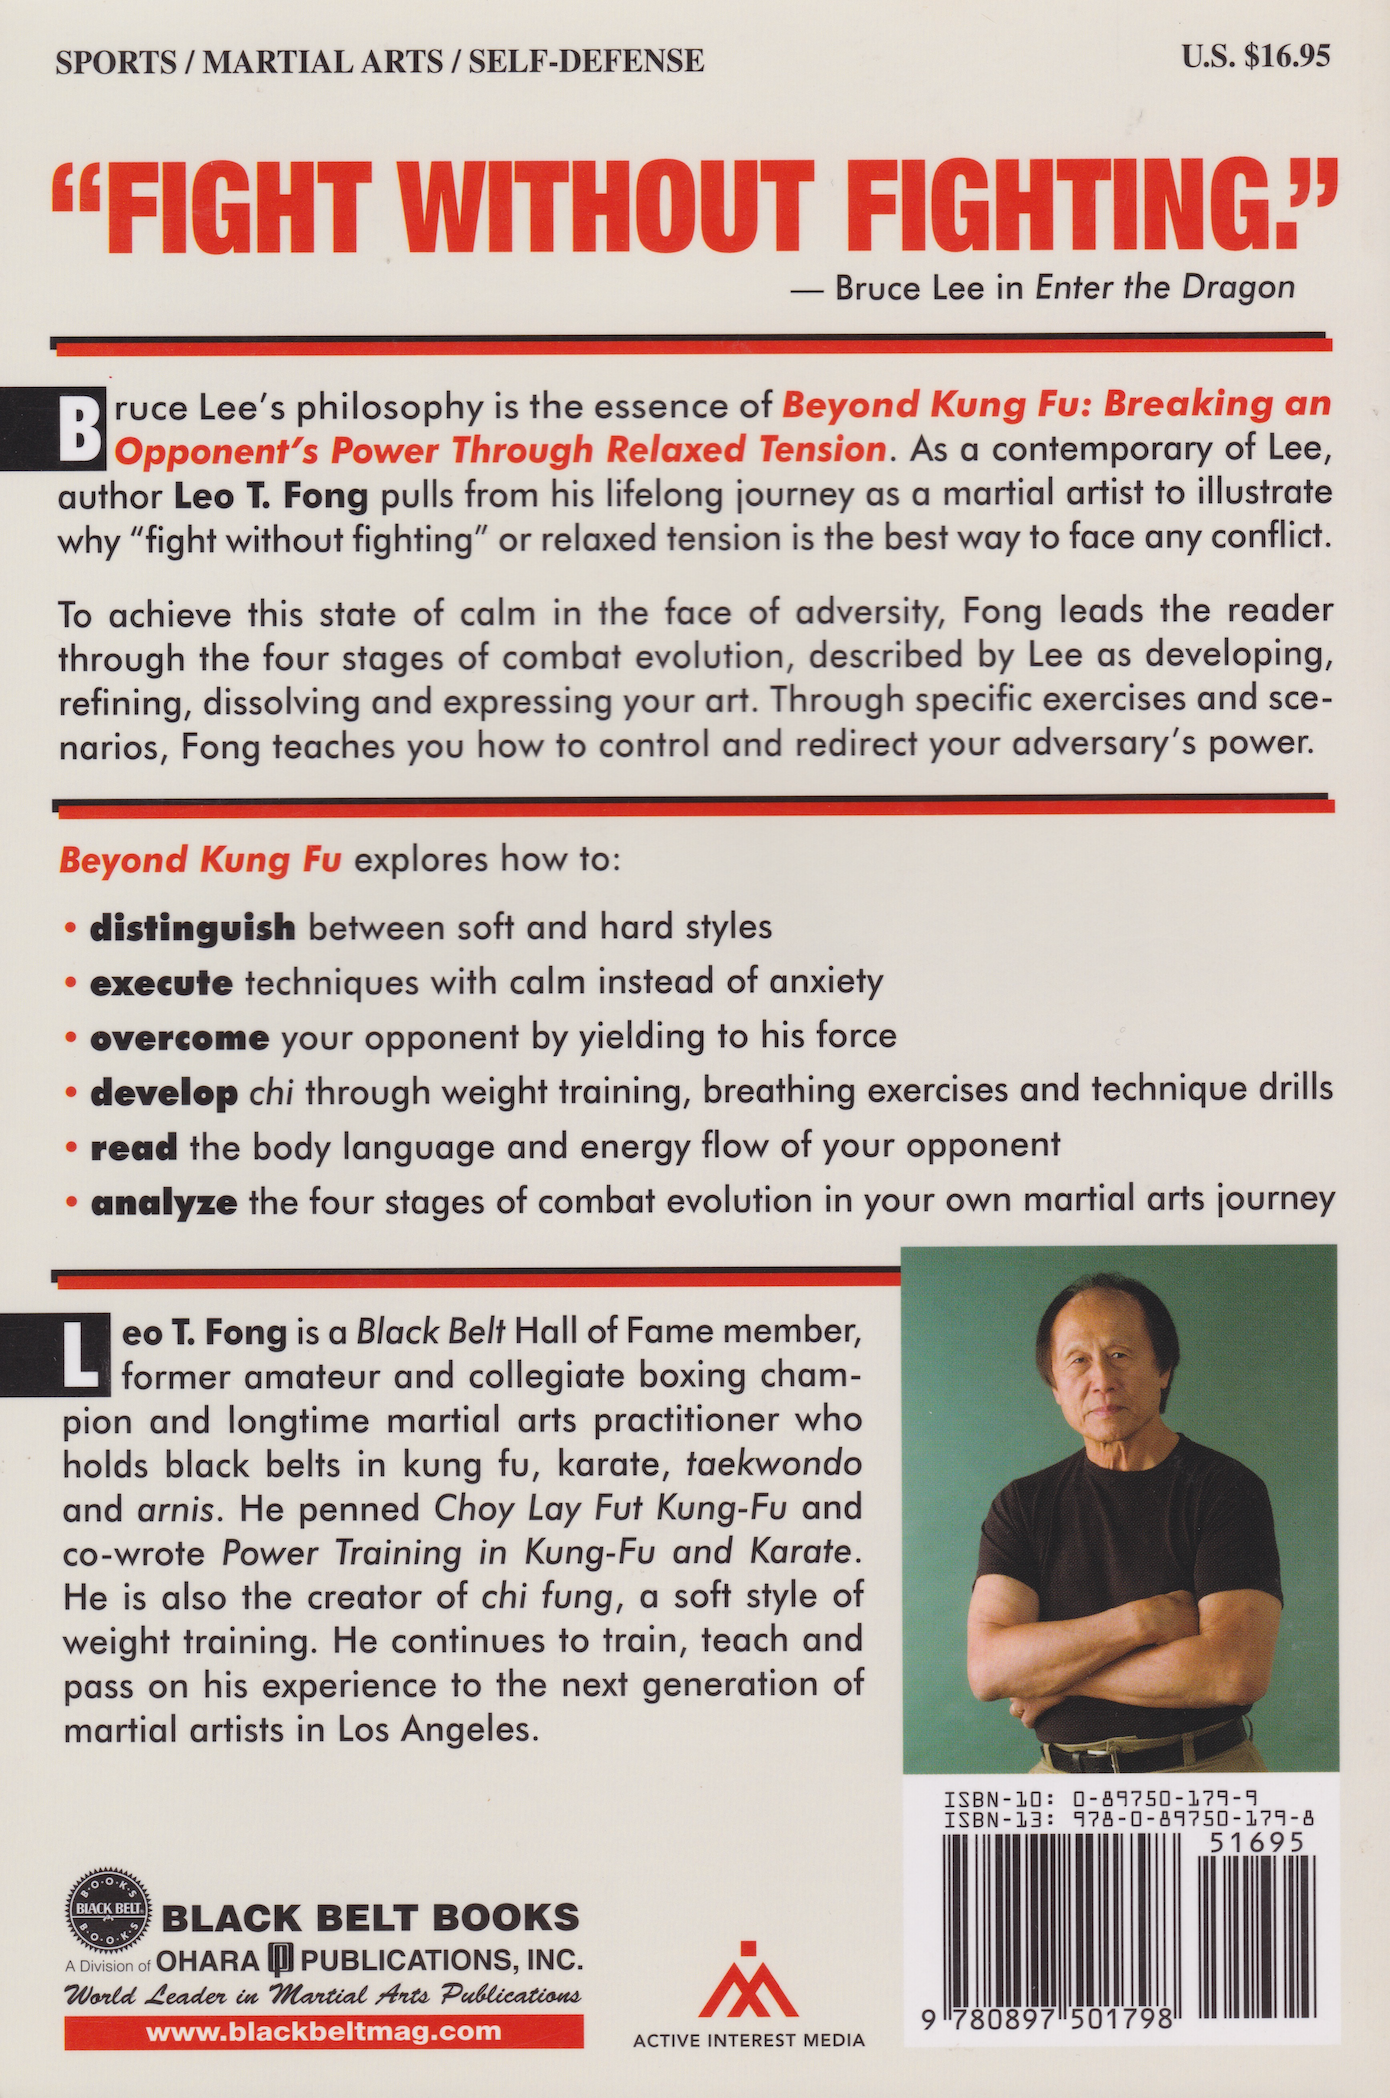 Beyond Kung Fu: Breaking an Opponent's Power Through Relaxed Tension (Preowned)